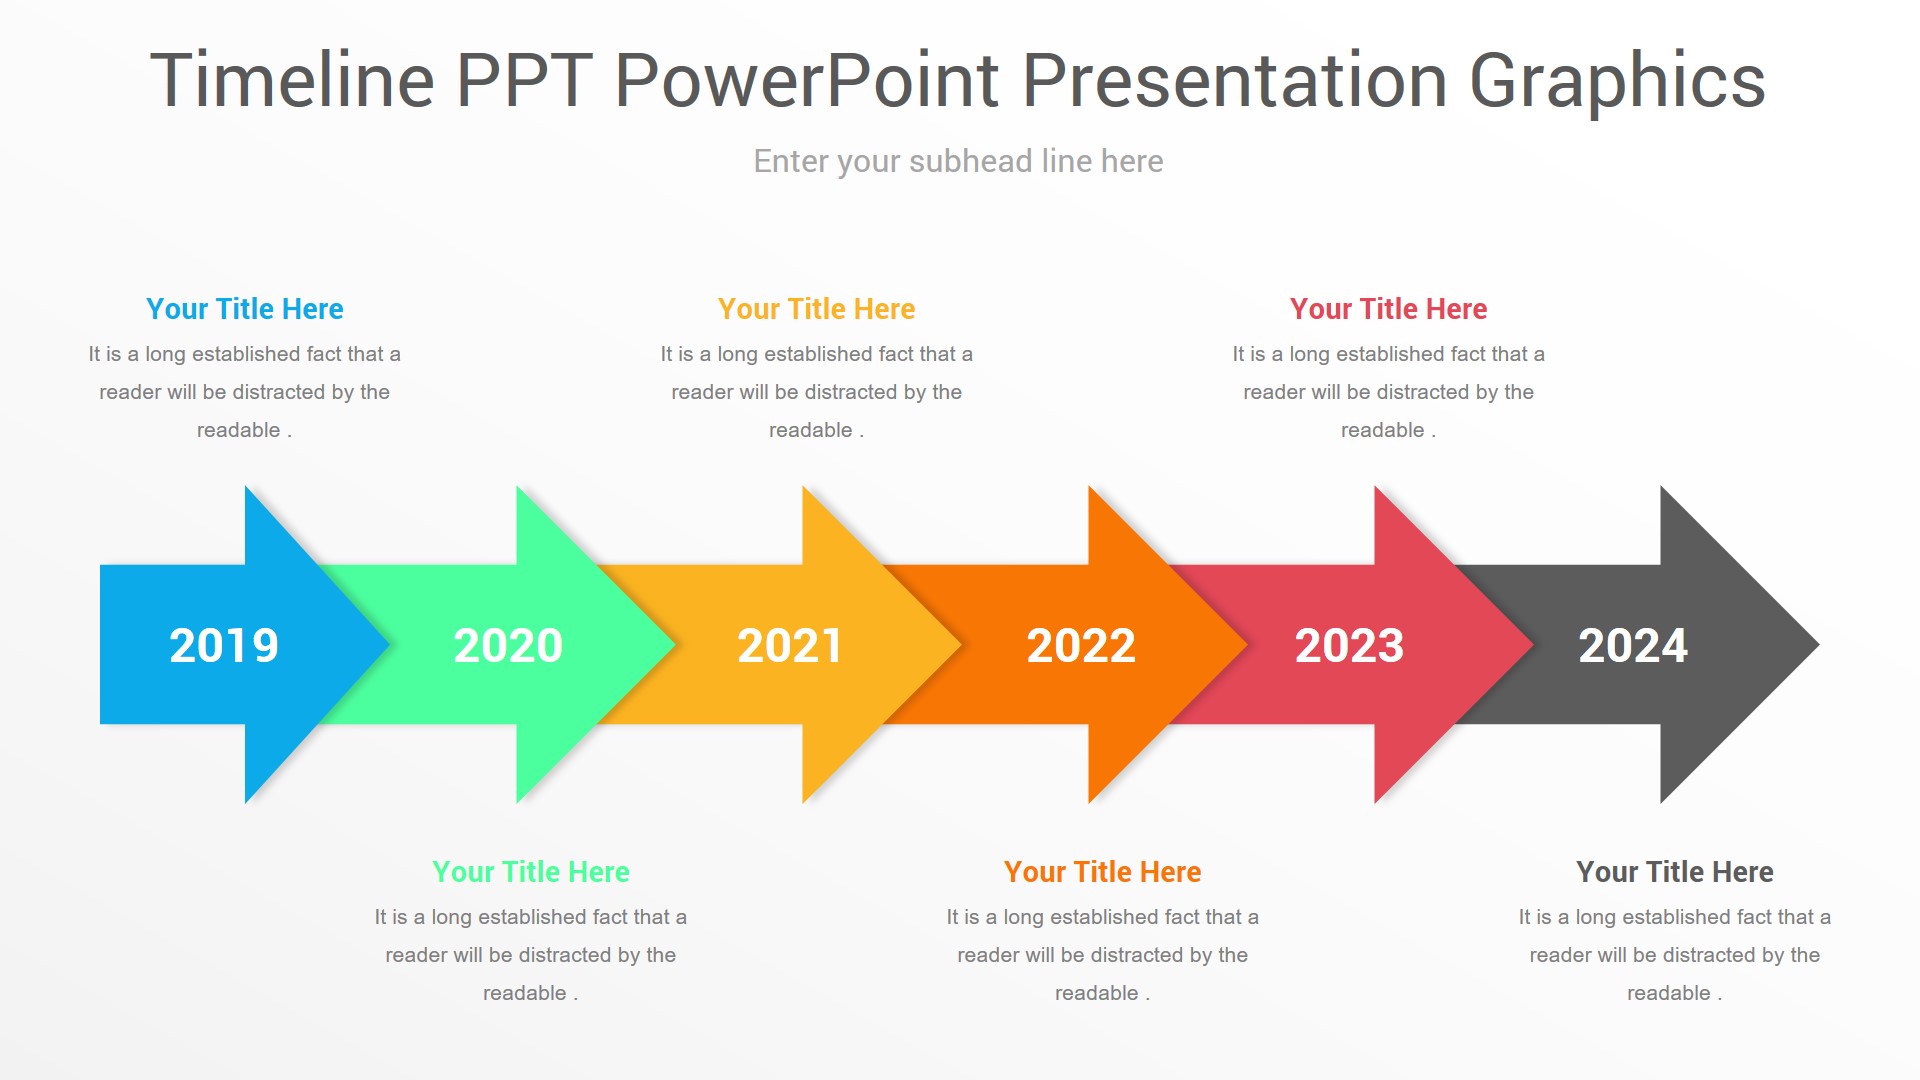 powerpoint presentation for timeline